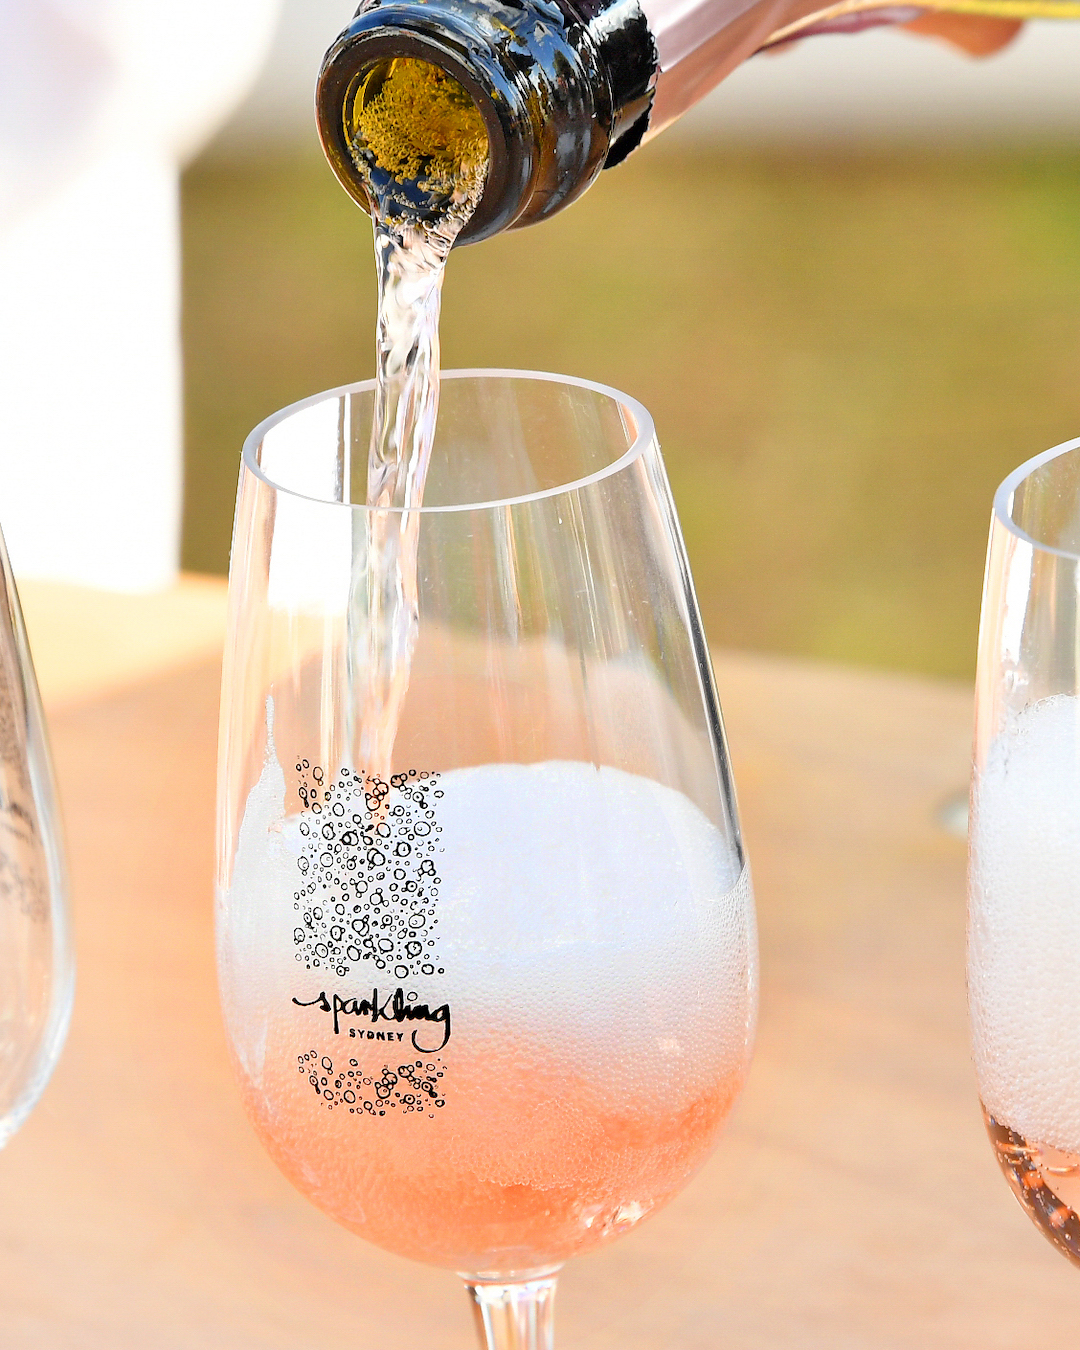 Sparkling sydney wine event what's on